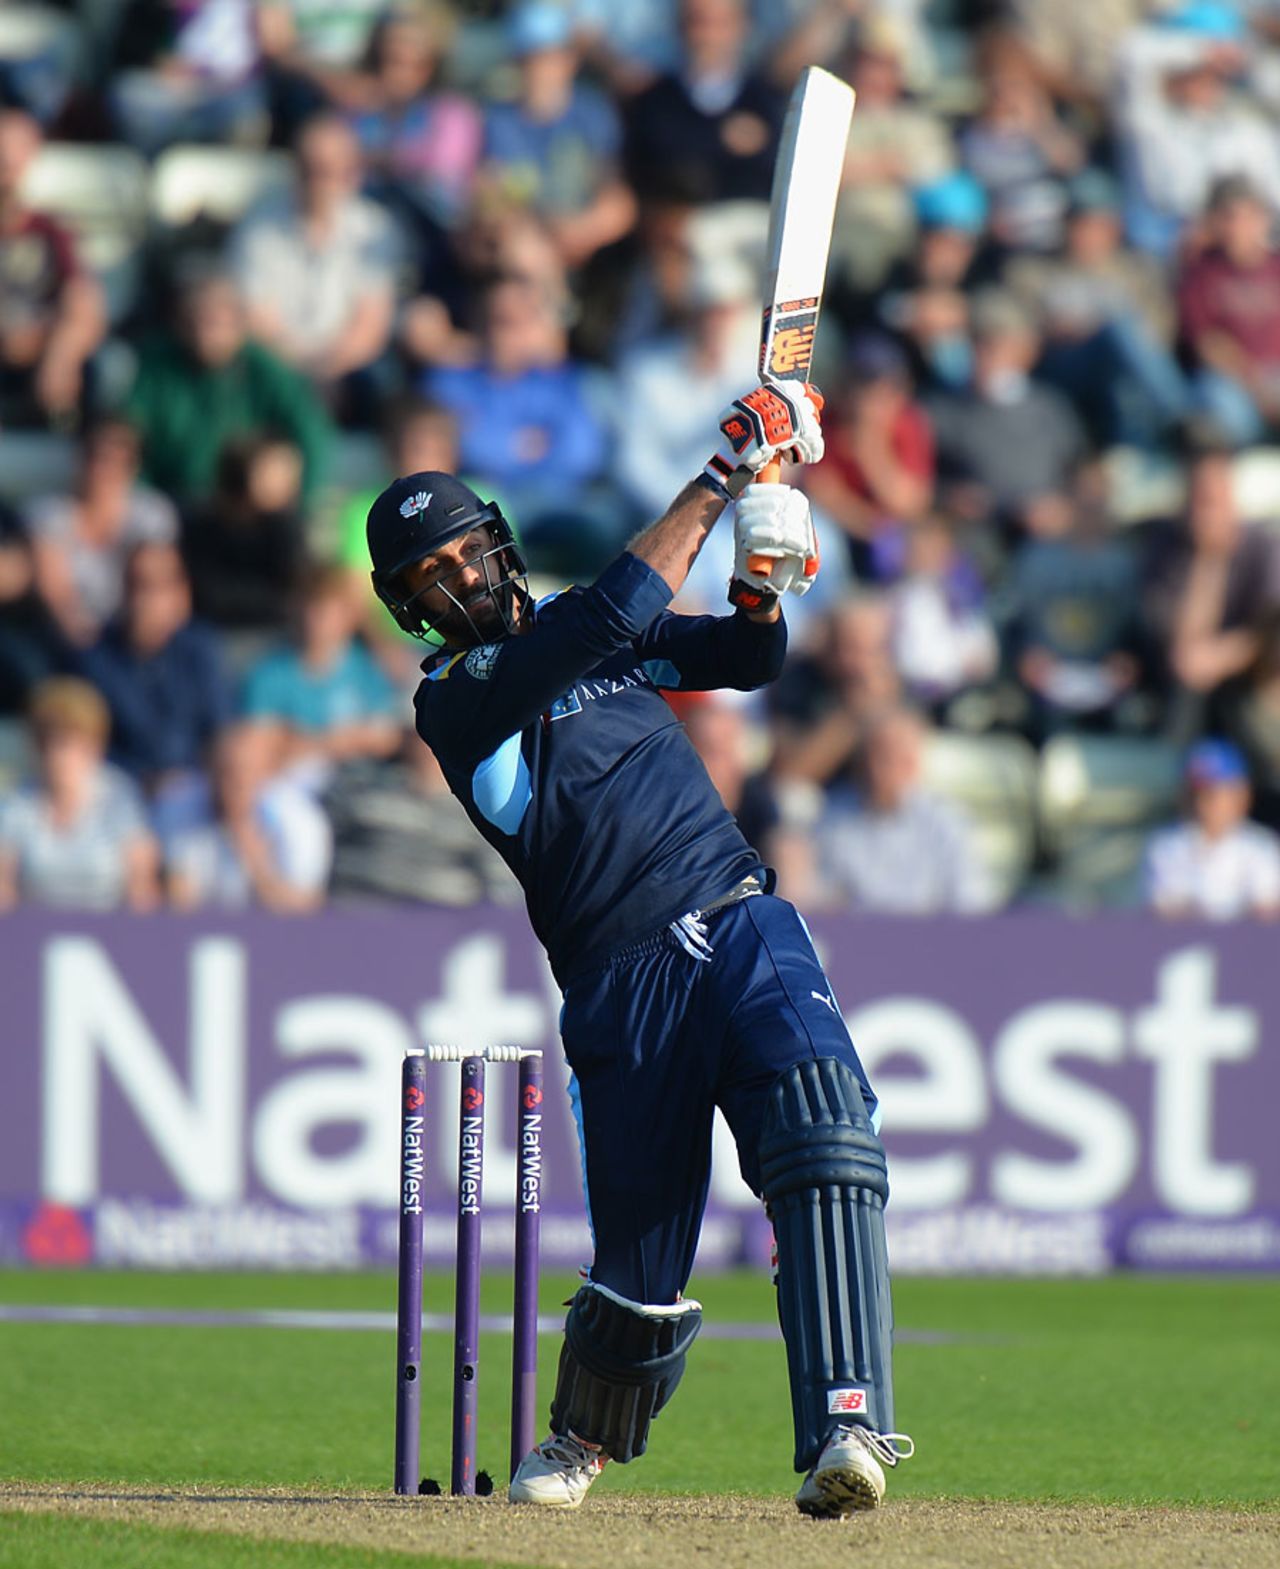 Liam Plunkett gave Yorkshire's total a boost, Worcestershire v Yorkshire, NatWest T20 Blast, North Group, New Road, June 2, 2016